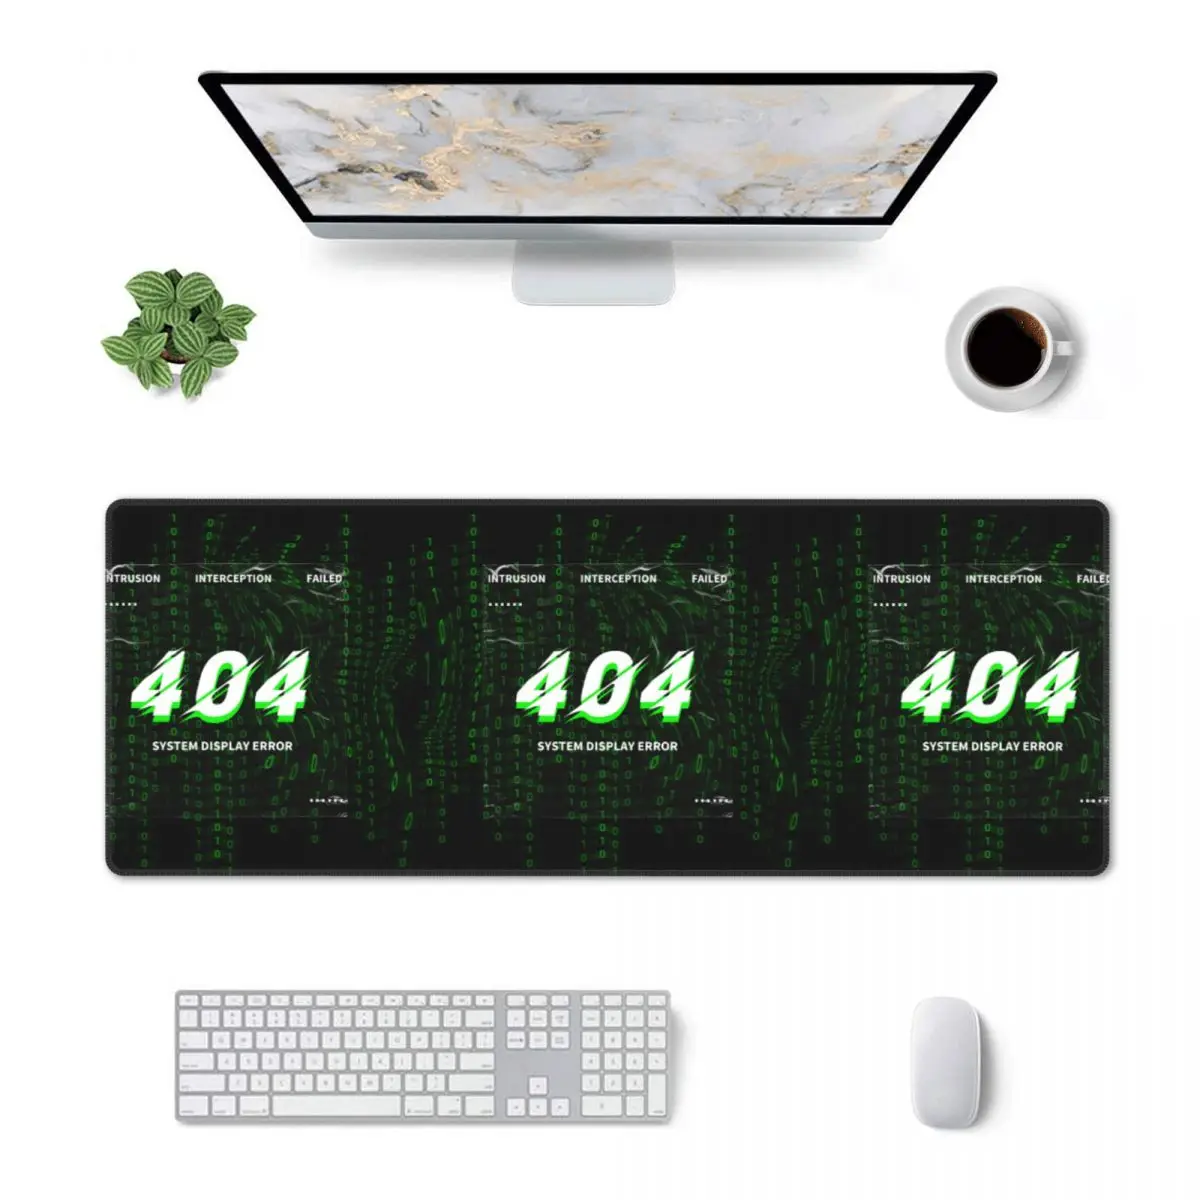 

Code Internet Networks Keyboard Desk Mat Mousepad XXL Game Rubber Gamer Mouse pad